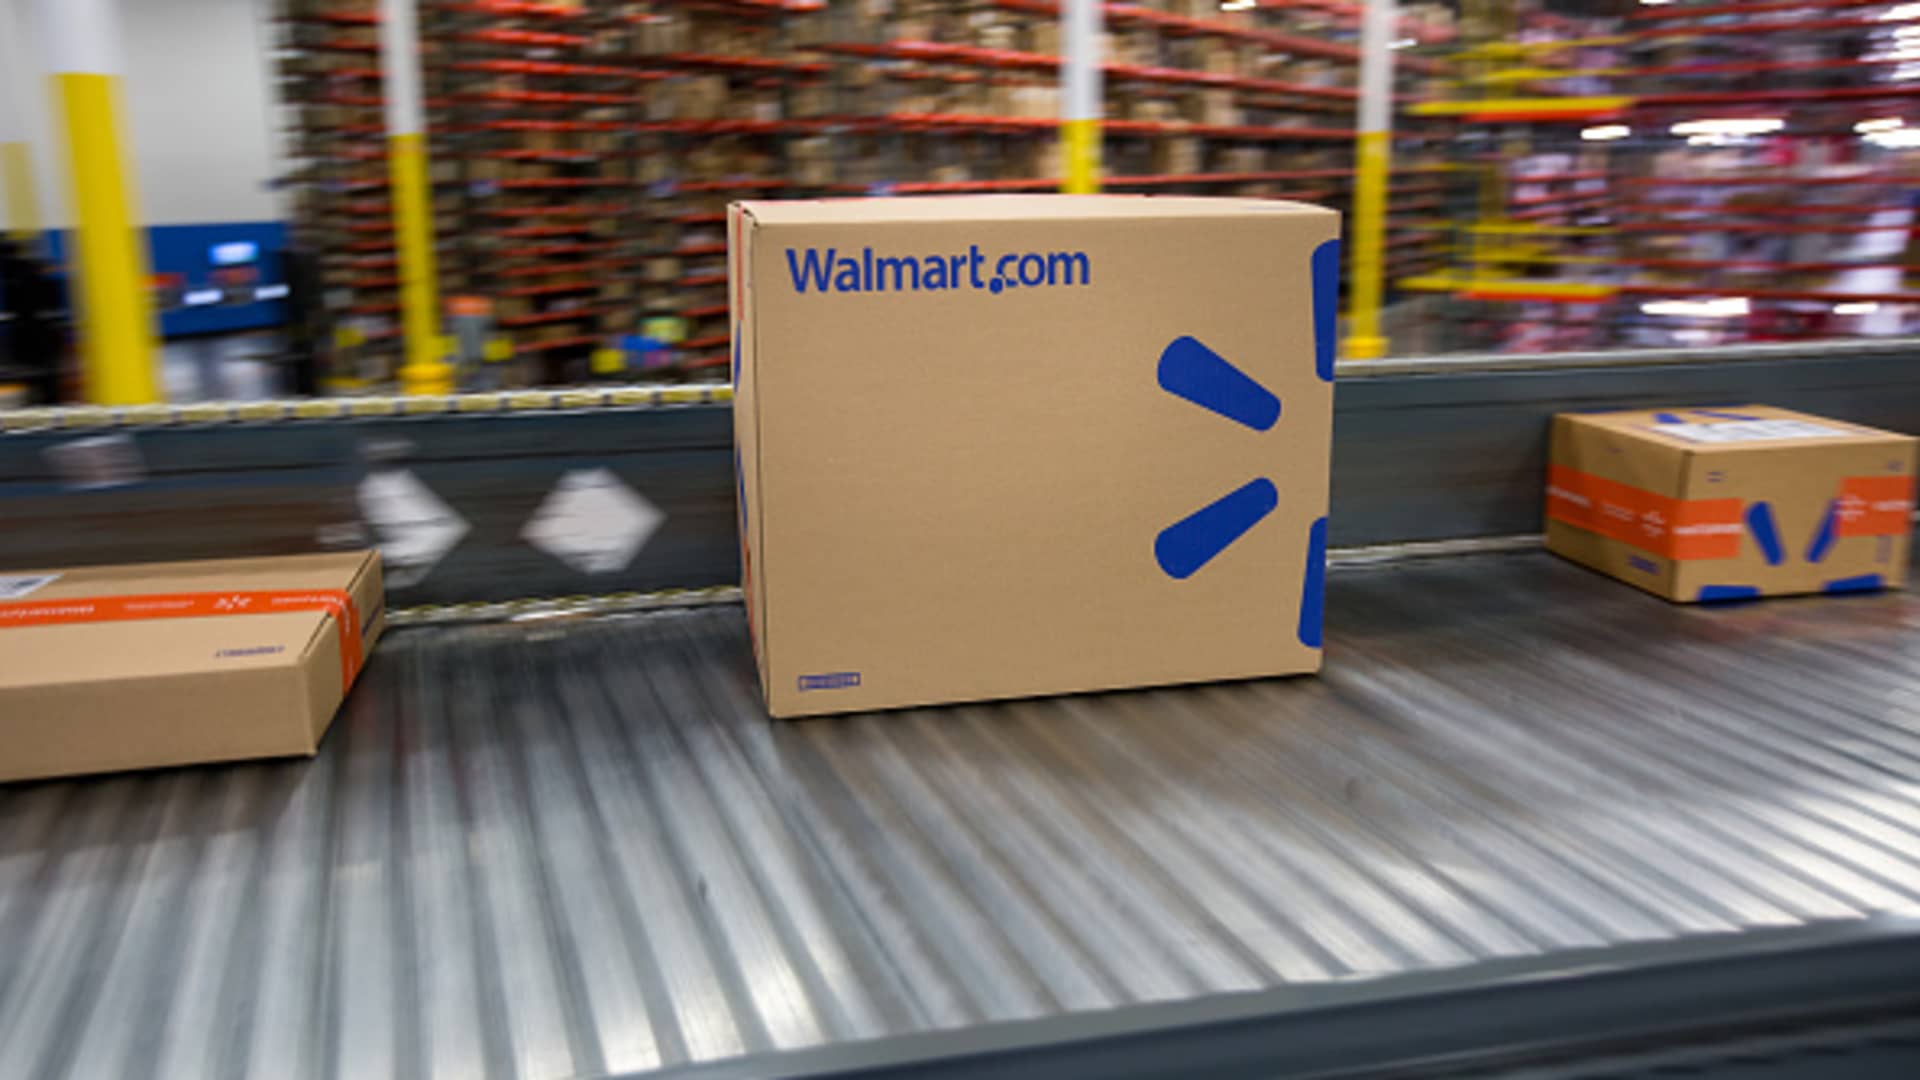 Walmart bets its stores will give it an edge in Amazon e-commerce duel